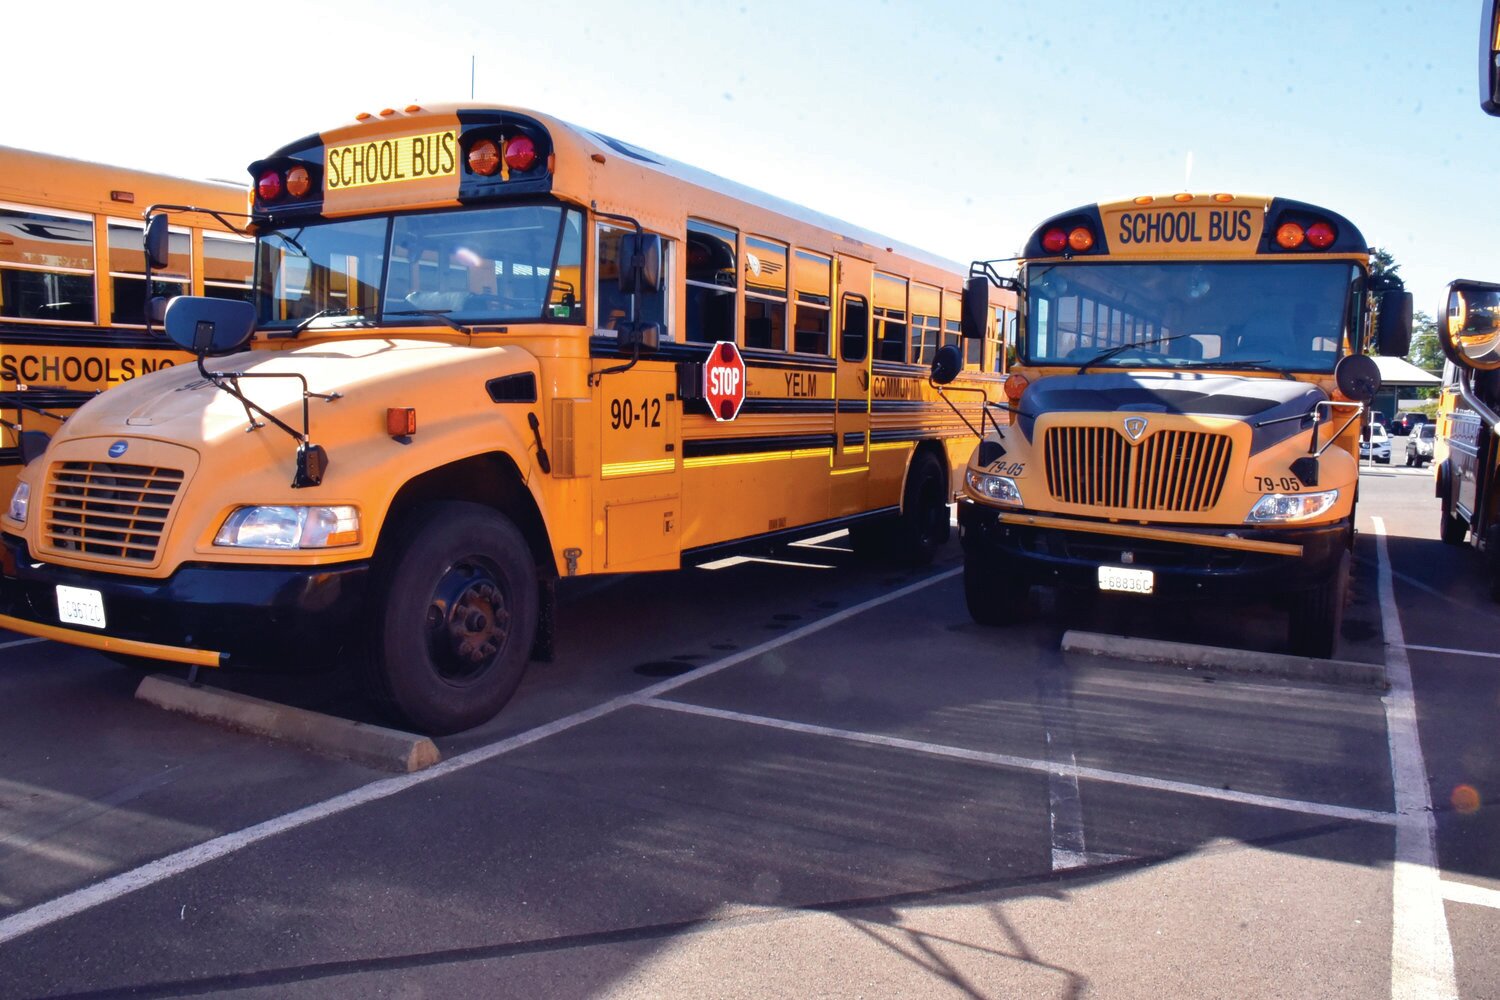 Yelm Community Schools buses sit ready to be driven, yet more drivers are needed to fill all the routes. The school district recently hired a new transportation director to help address the district's challenges.